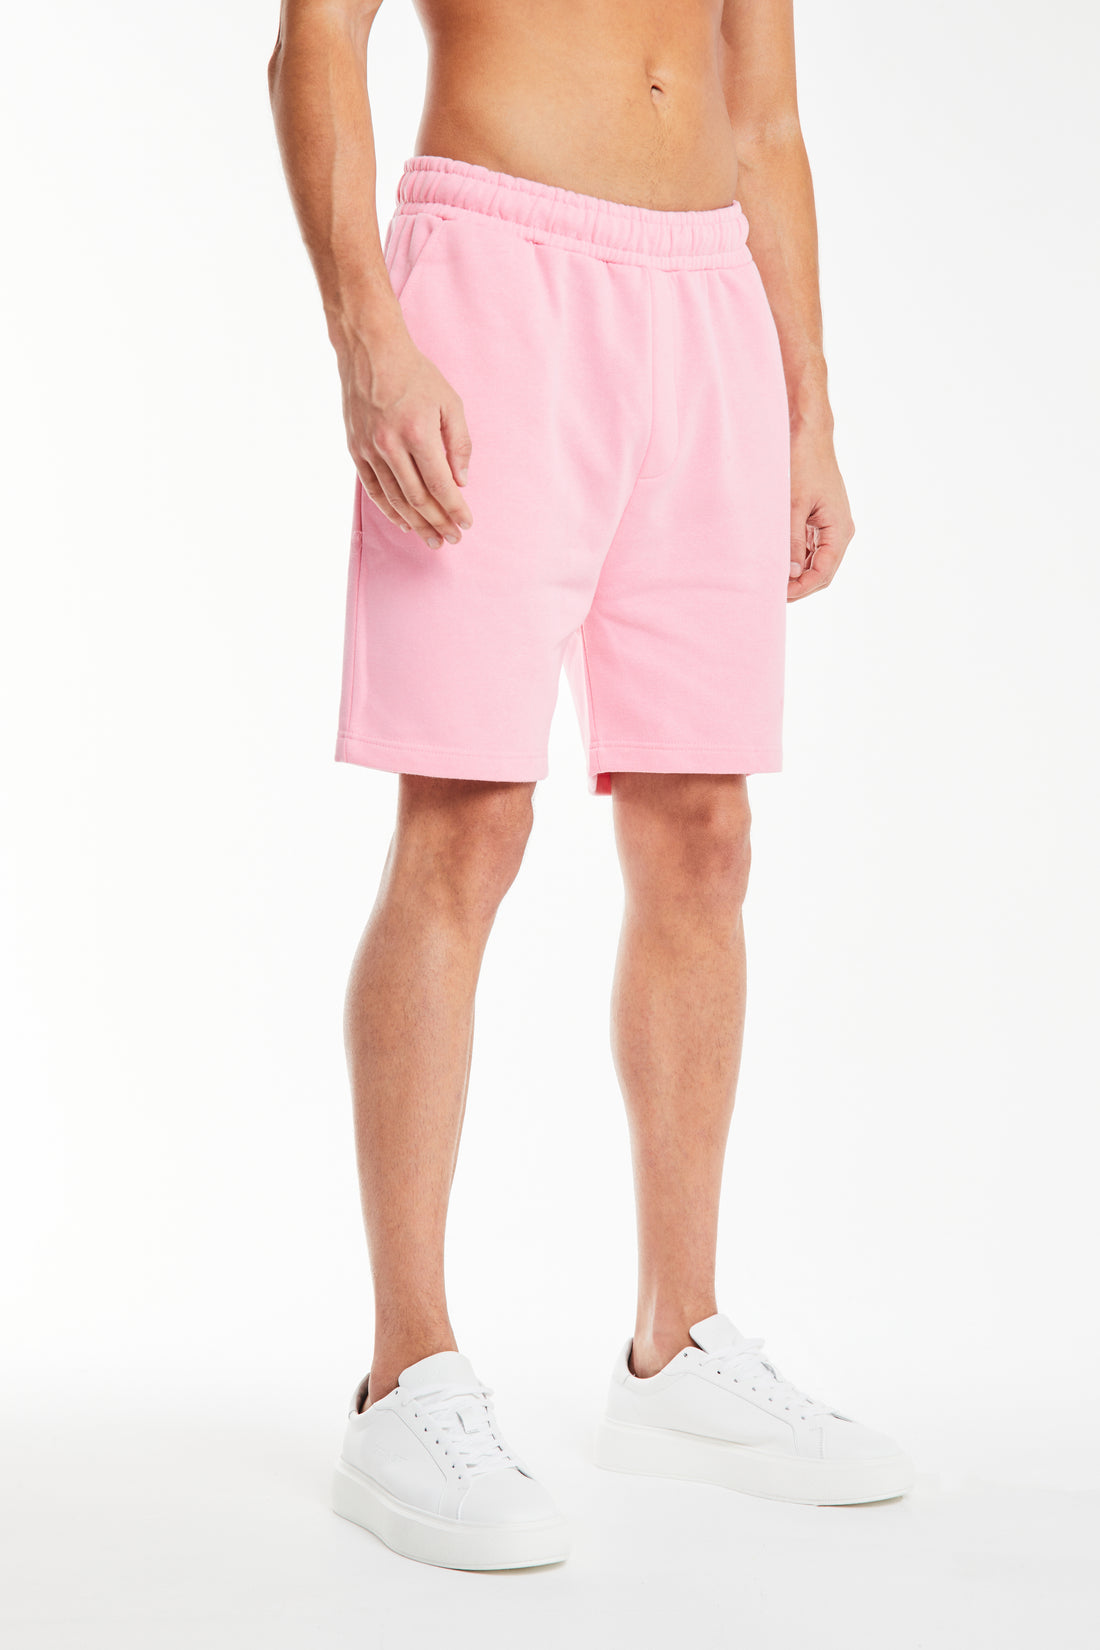 mens jersey shorts sale in baby pink